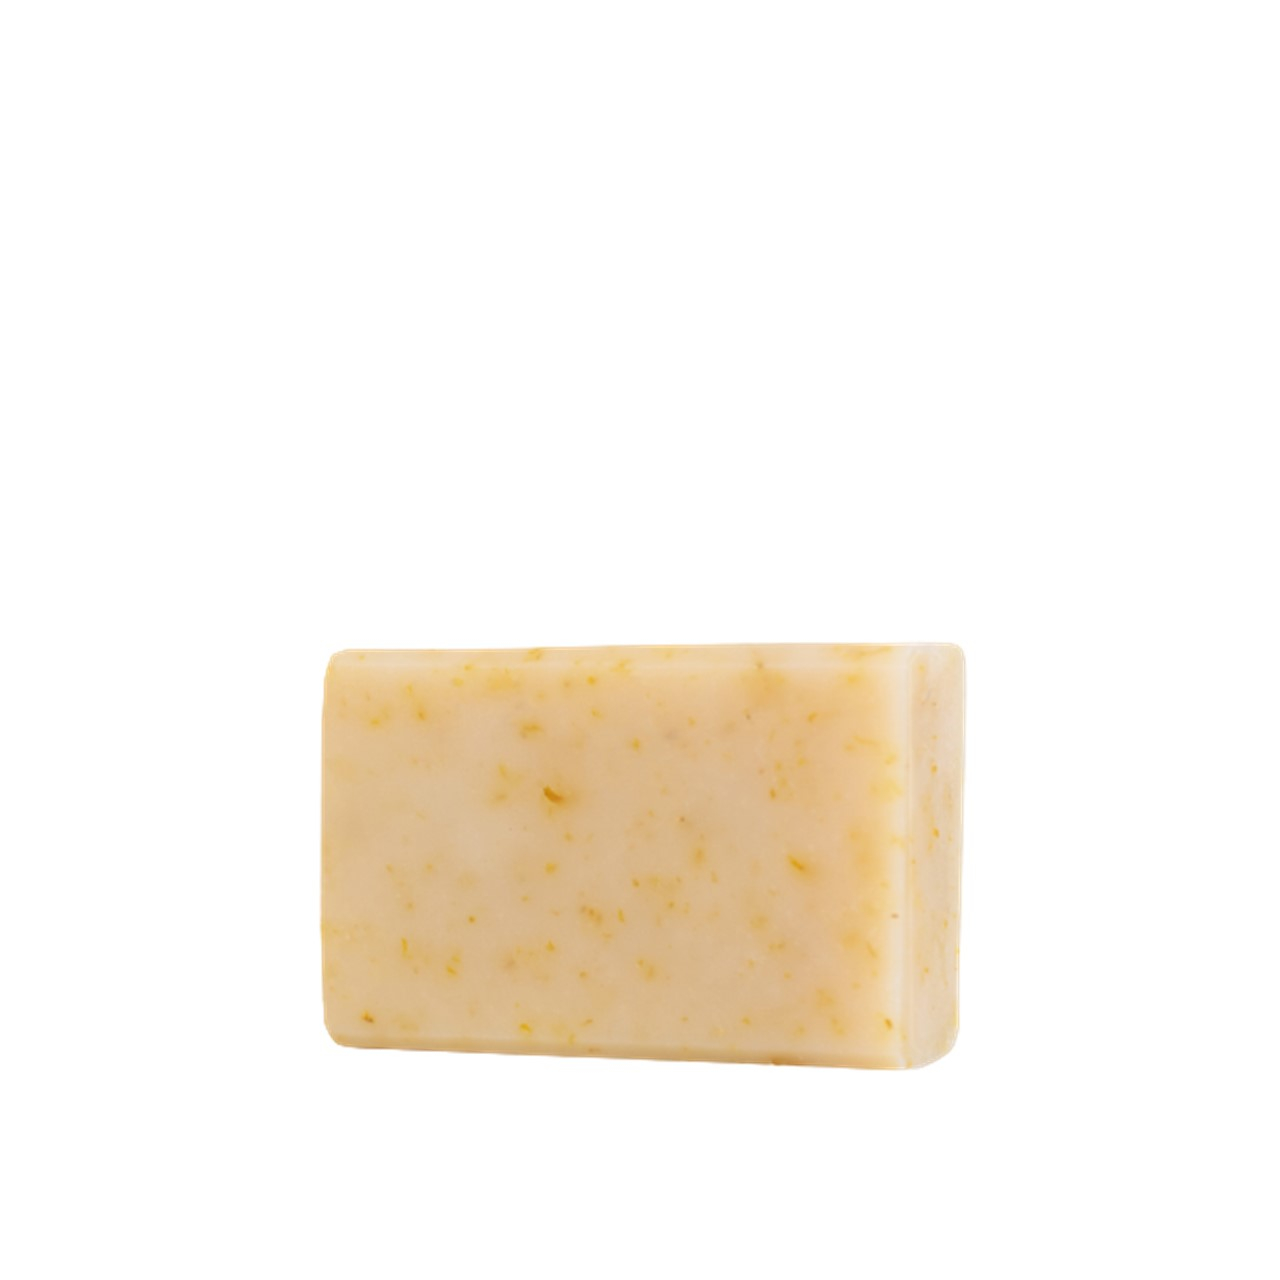 Codex Labs Bia Unscented Soap 120g (4.23oz)